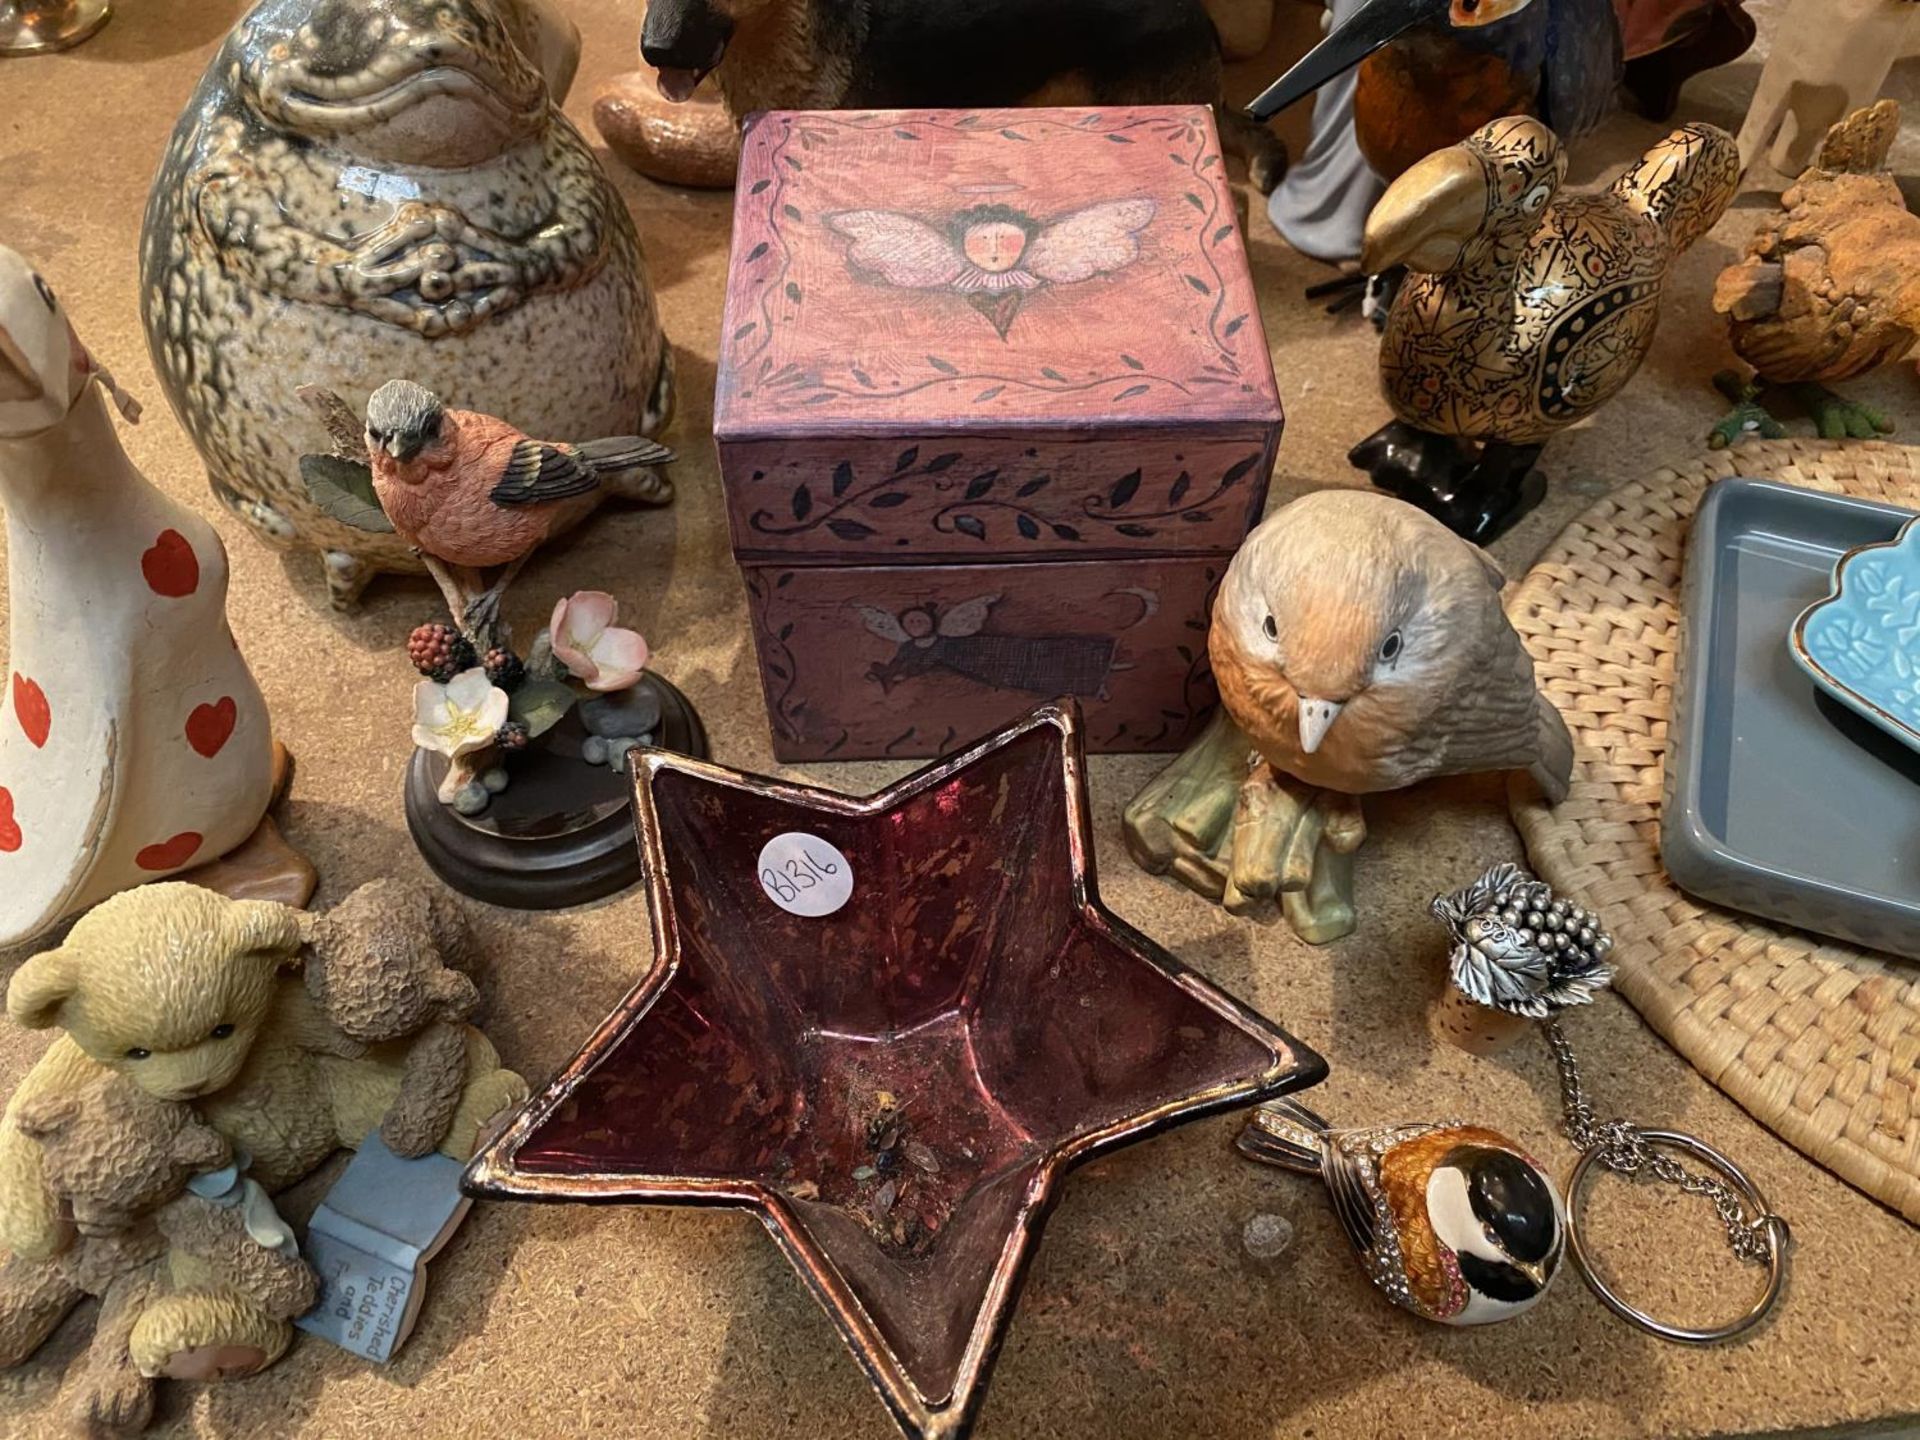 A LARGE COLLECTION OF ITEMS TO INCLUDE SEVERAL ANIMAL FIGURINES, DECORATIVE PLATES AND TRINKET - Image 5 of 6